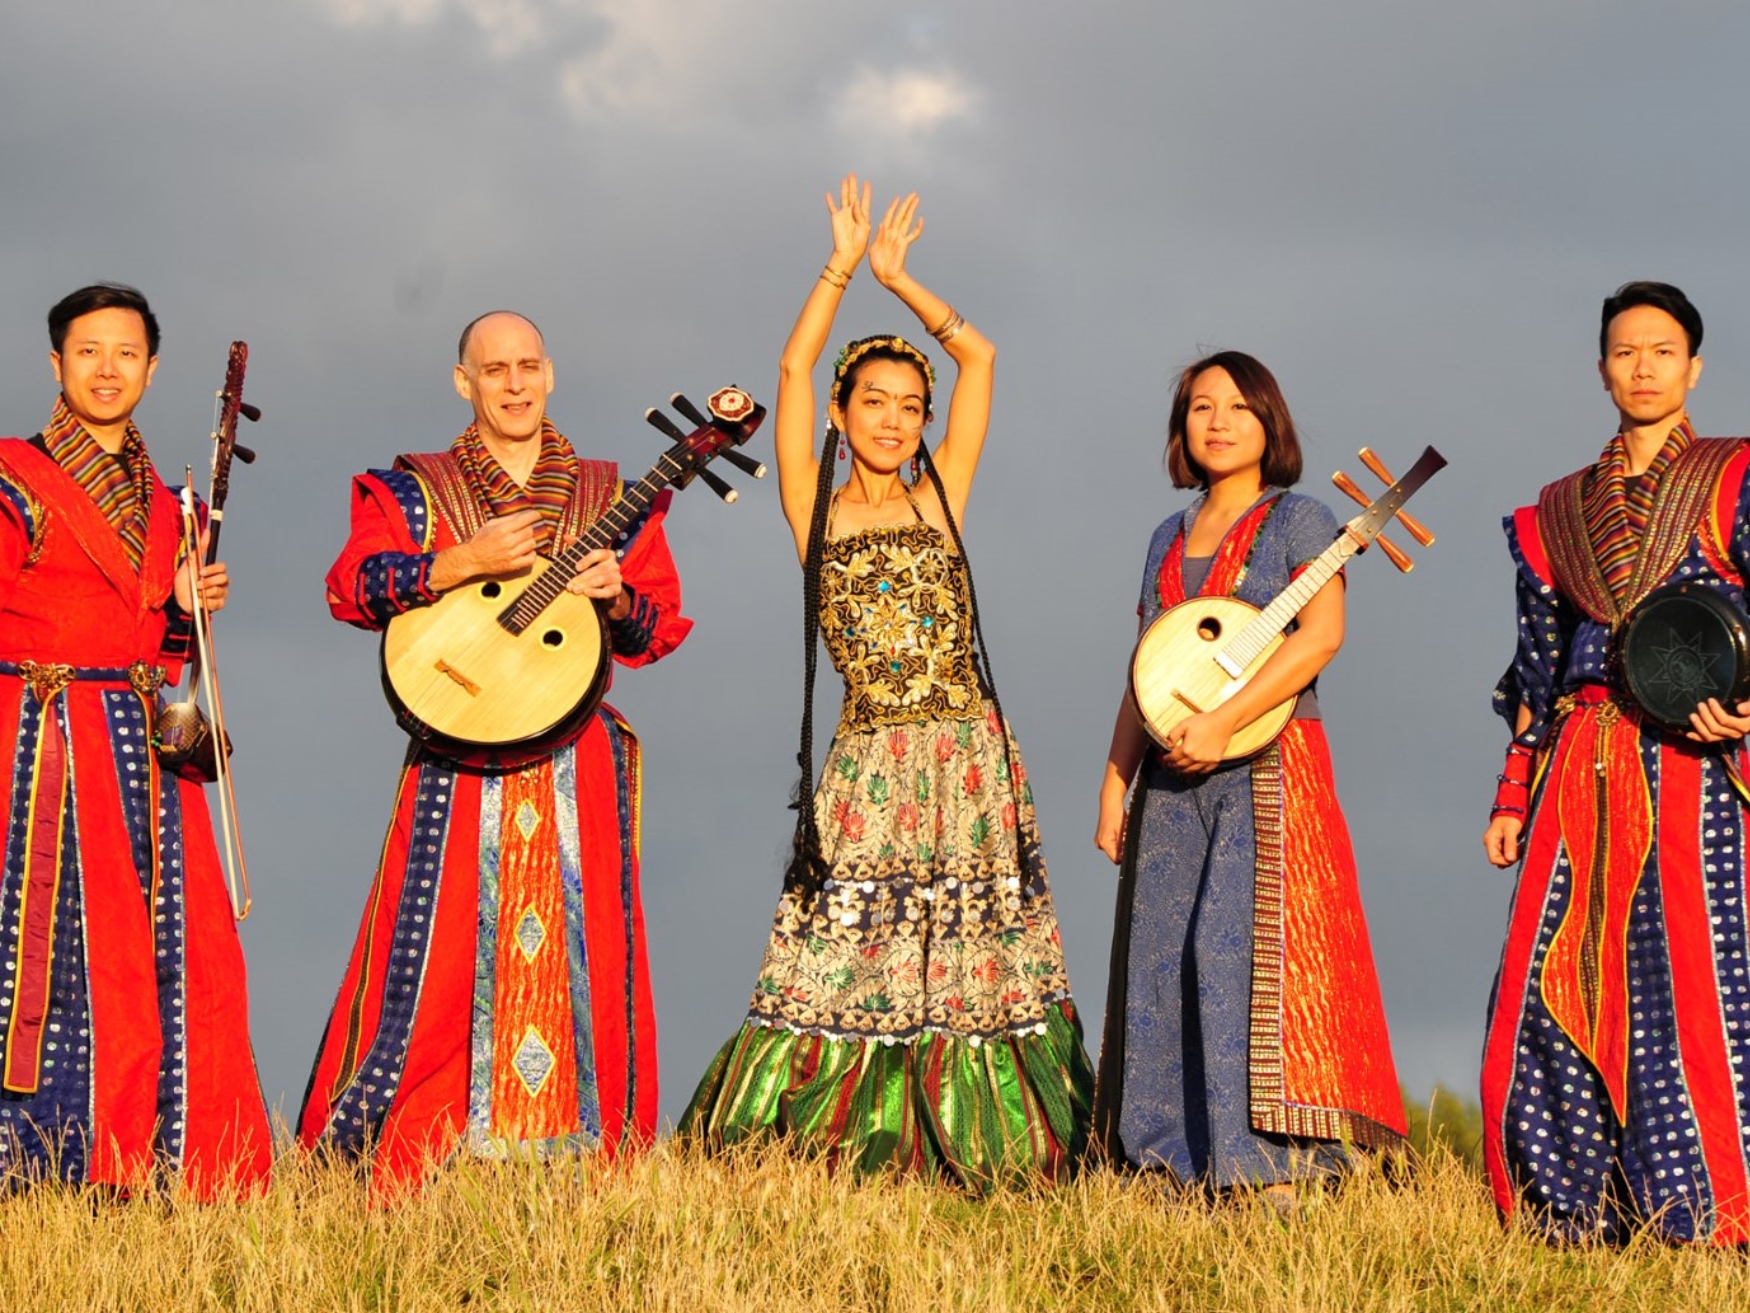 Five people in traditional Taiwanese dress, holding various instruments